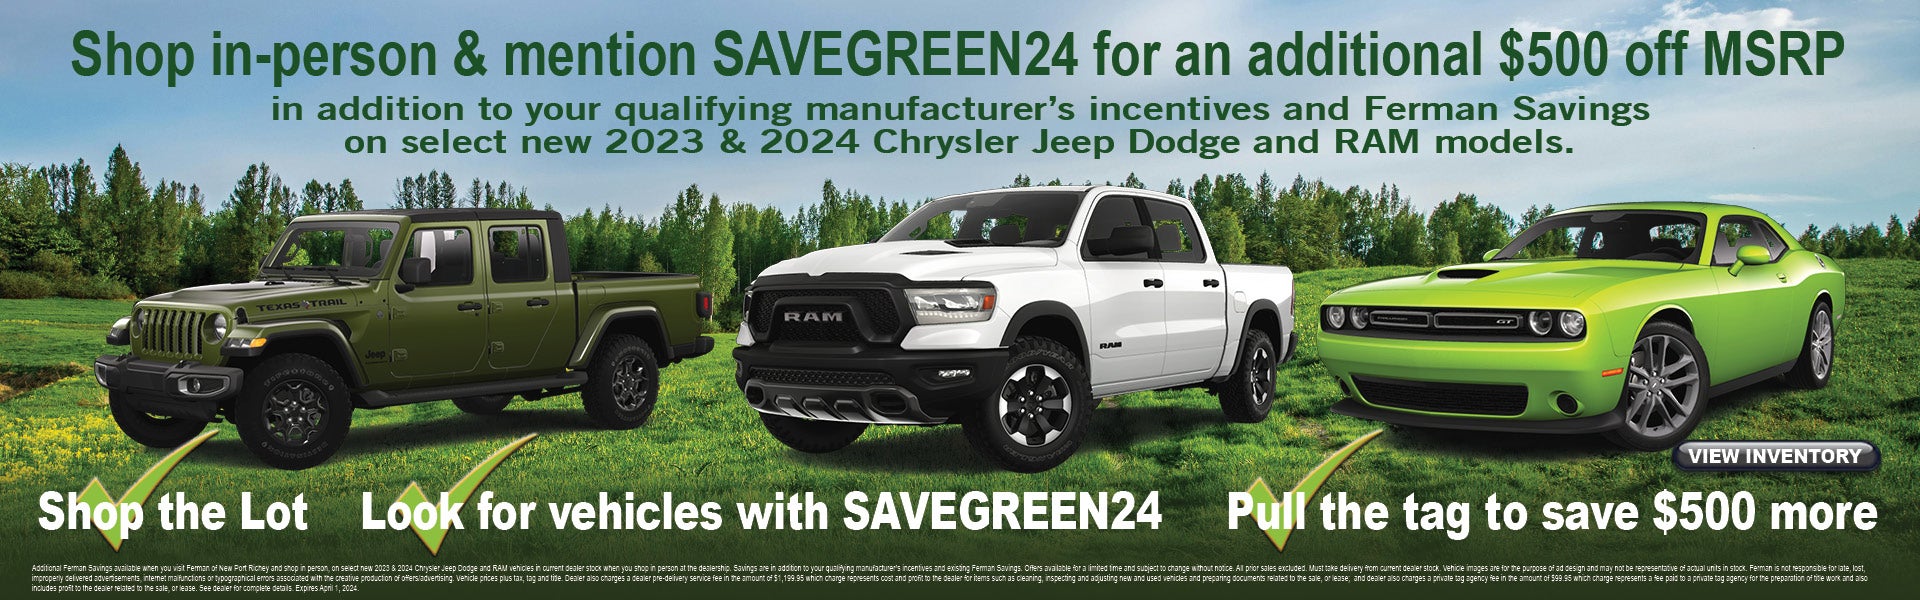 Mention Savegreen24 and save $500 more